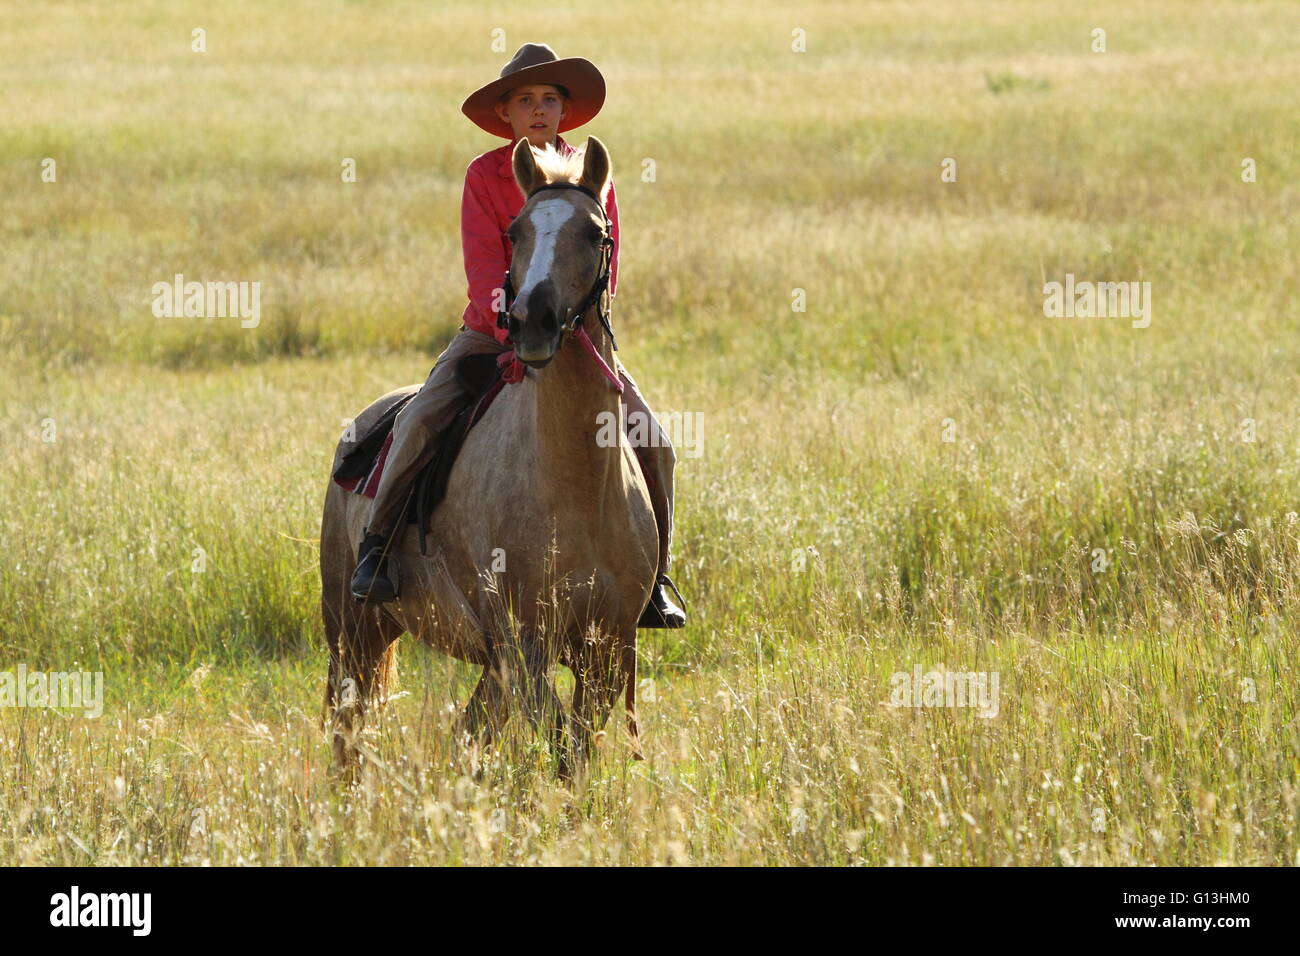 A young pre-teen girl sitting on her horse near Eidsvold, Queensland, Australia during a cattle drive. Stock Photo